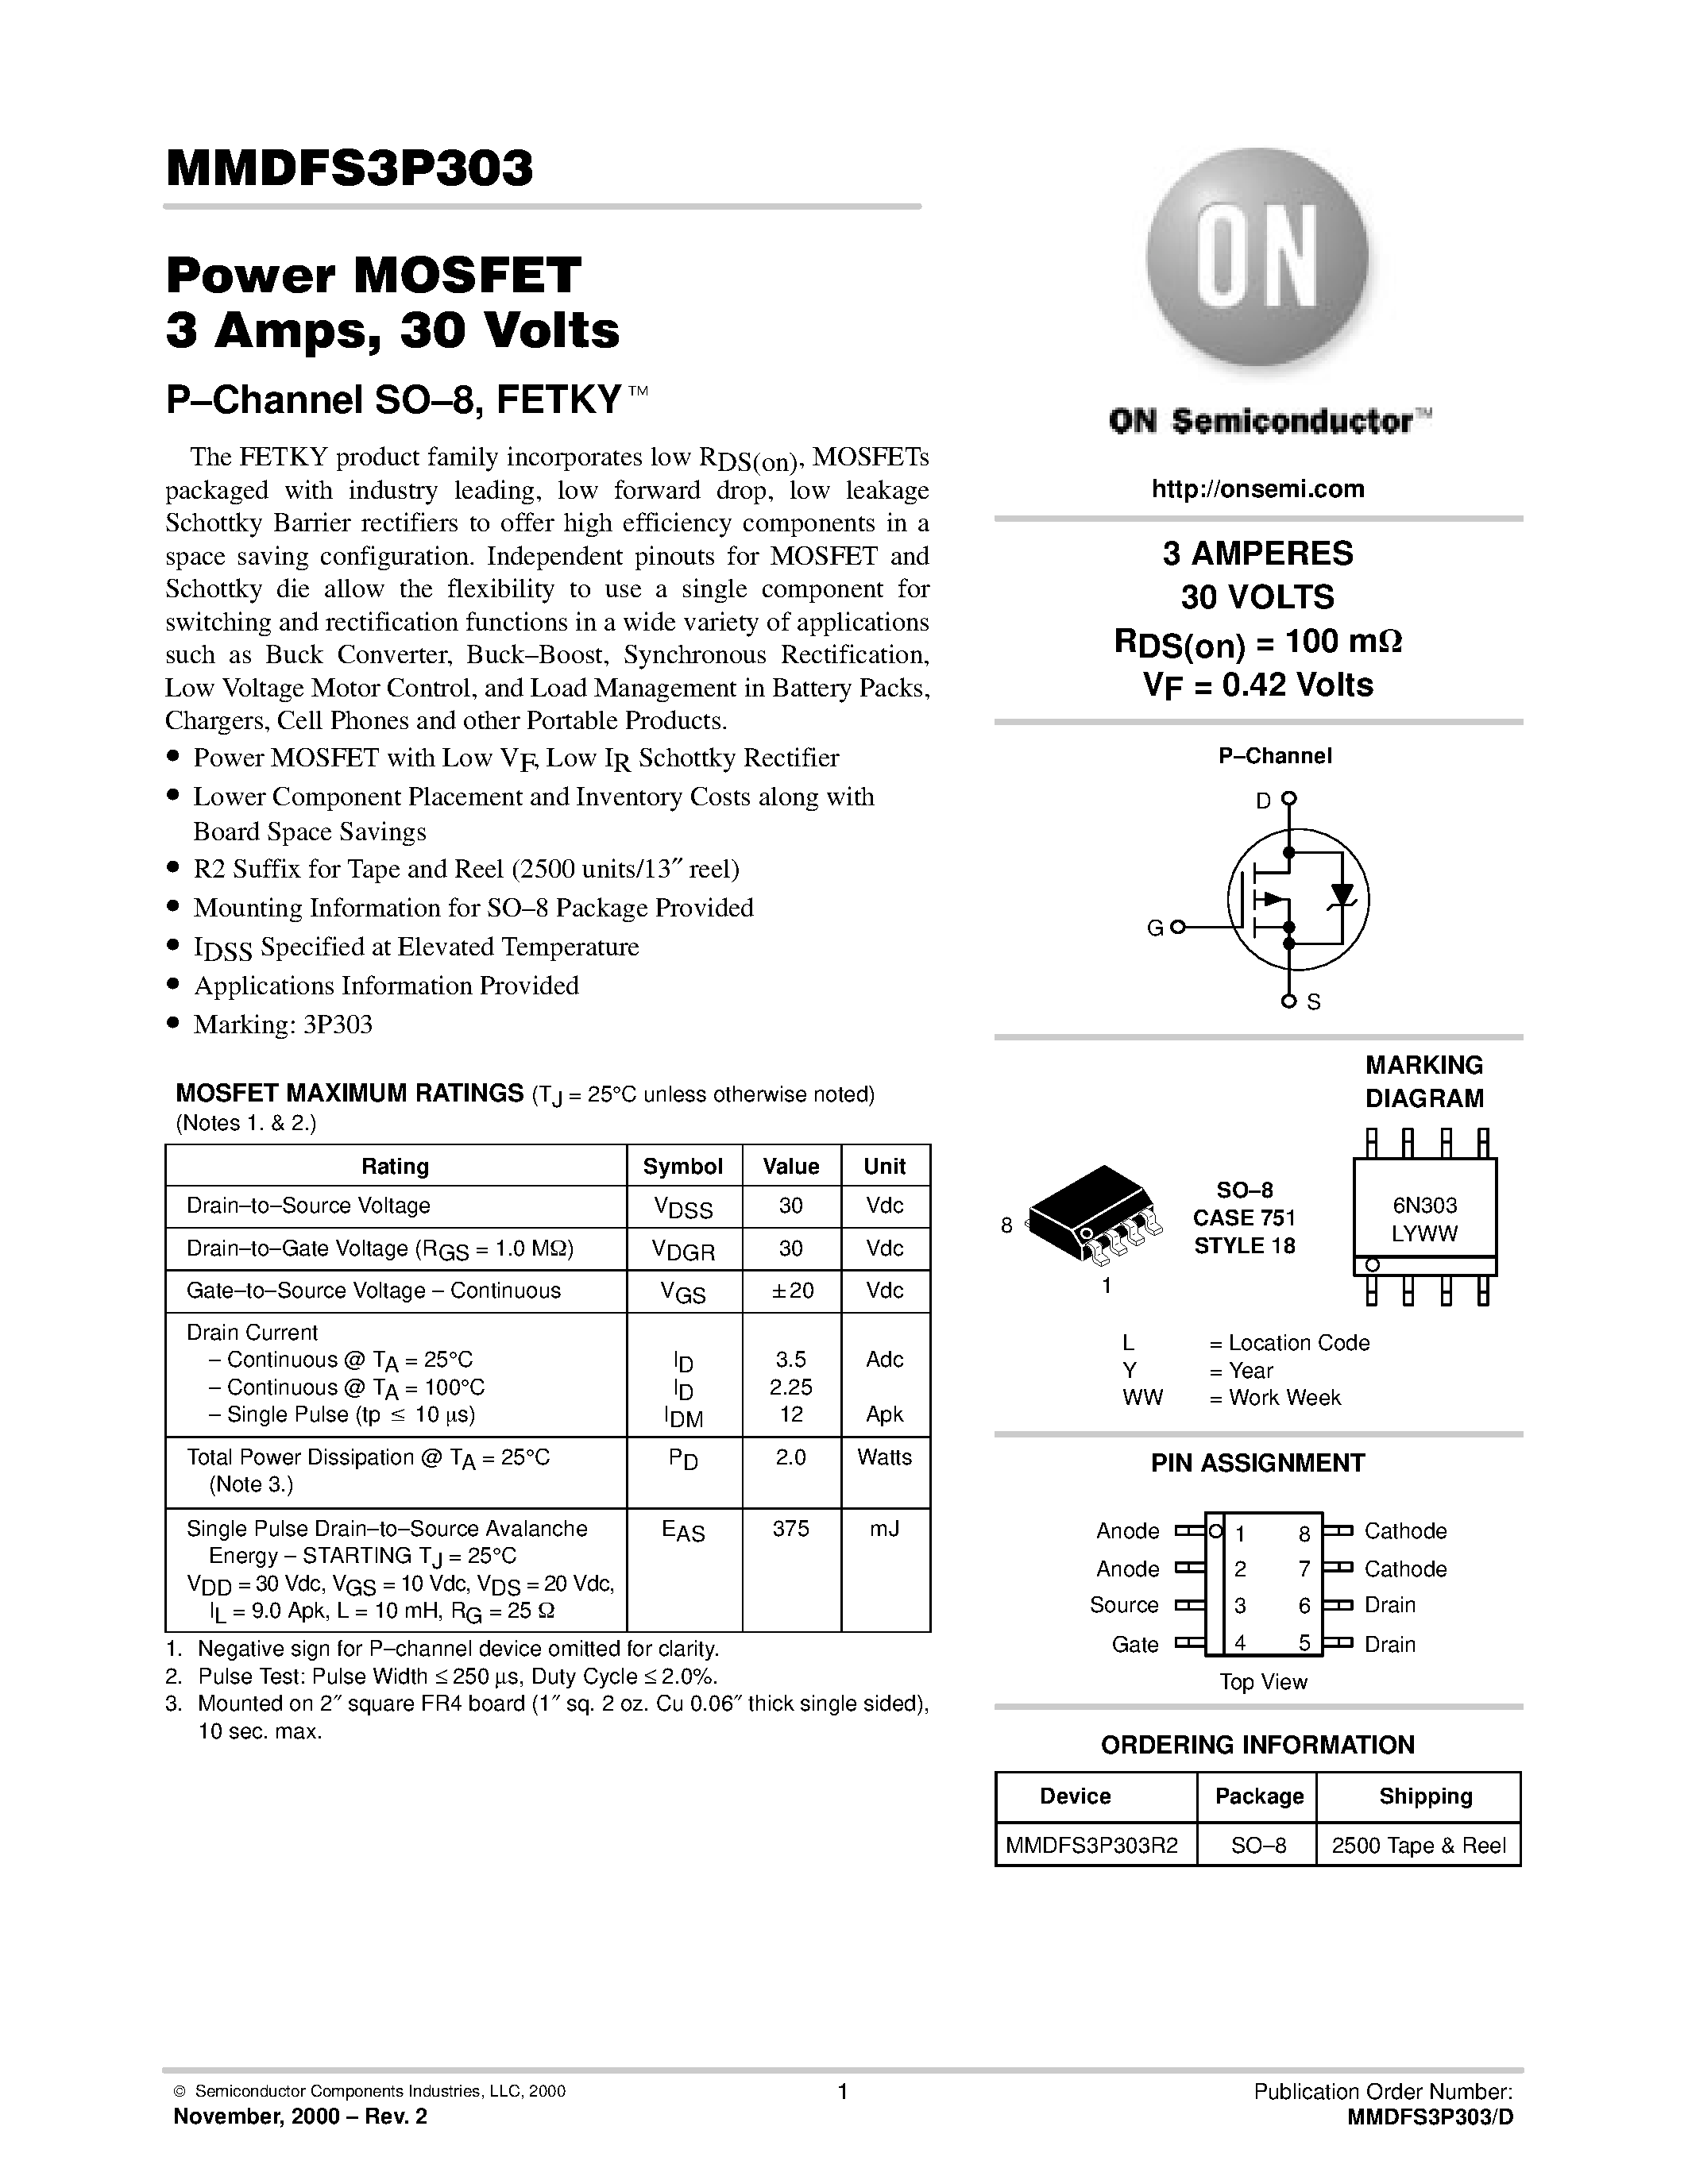 Datasheet MMDFS3P303-D - Power MOSFET 3 Amps / 30 Volts page 1